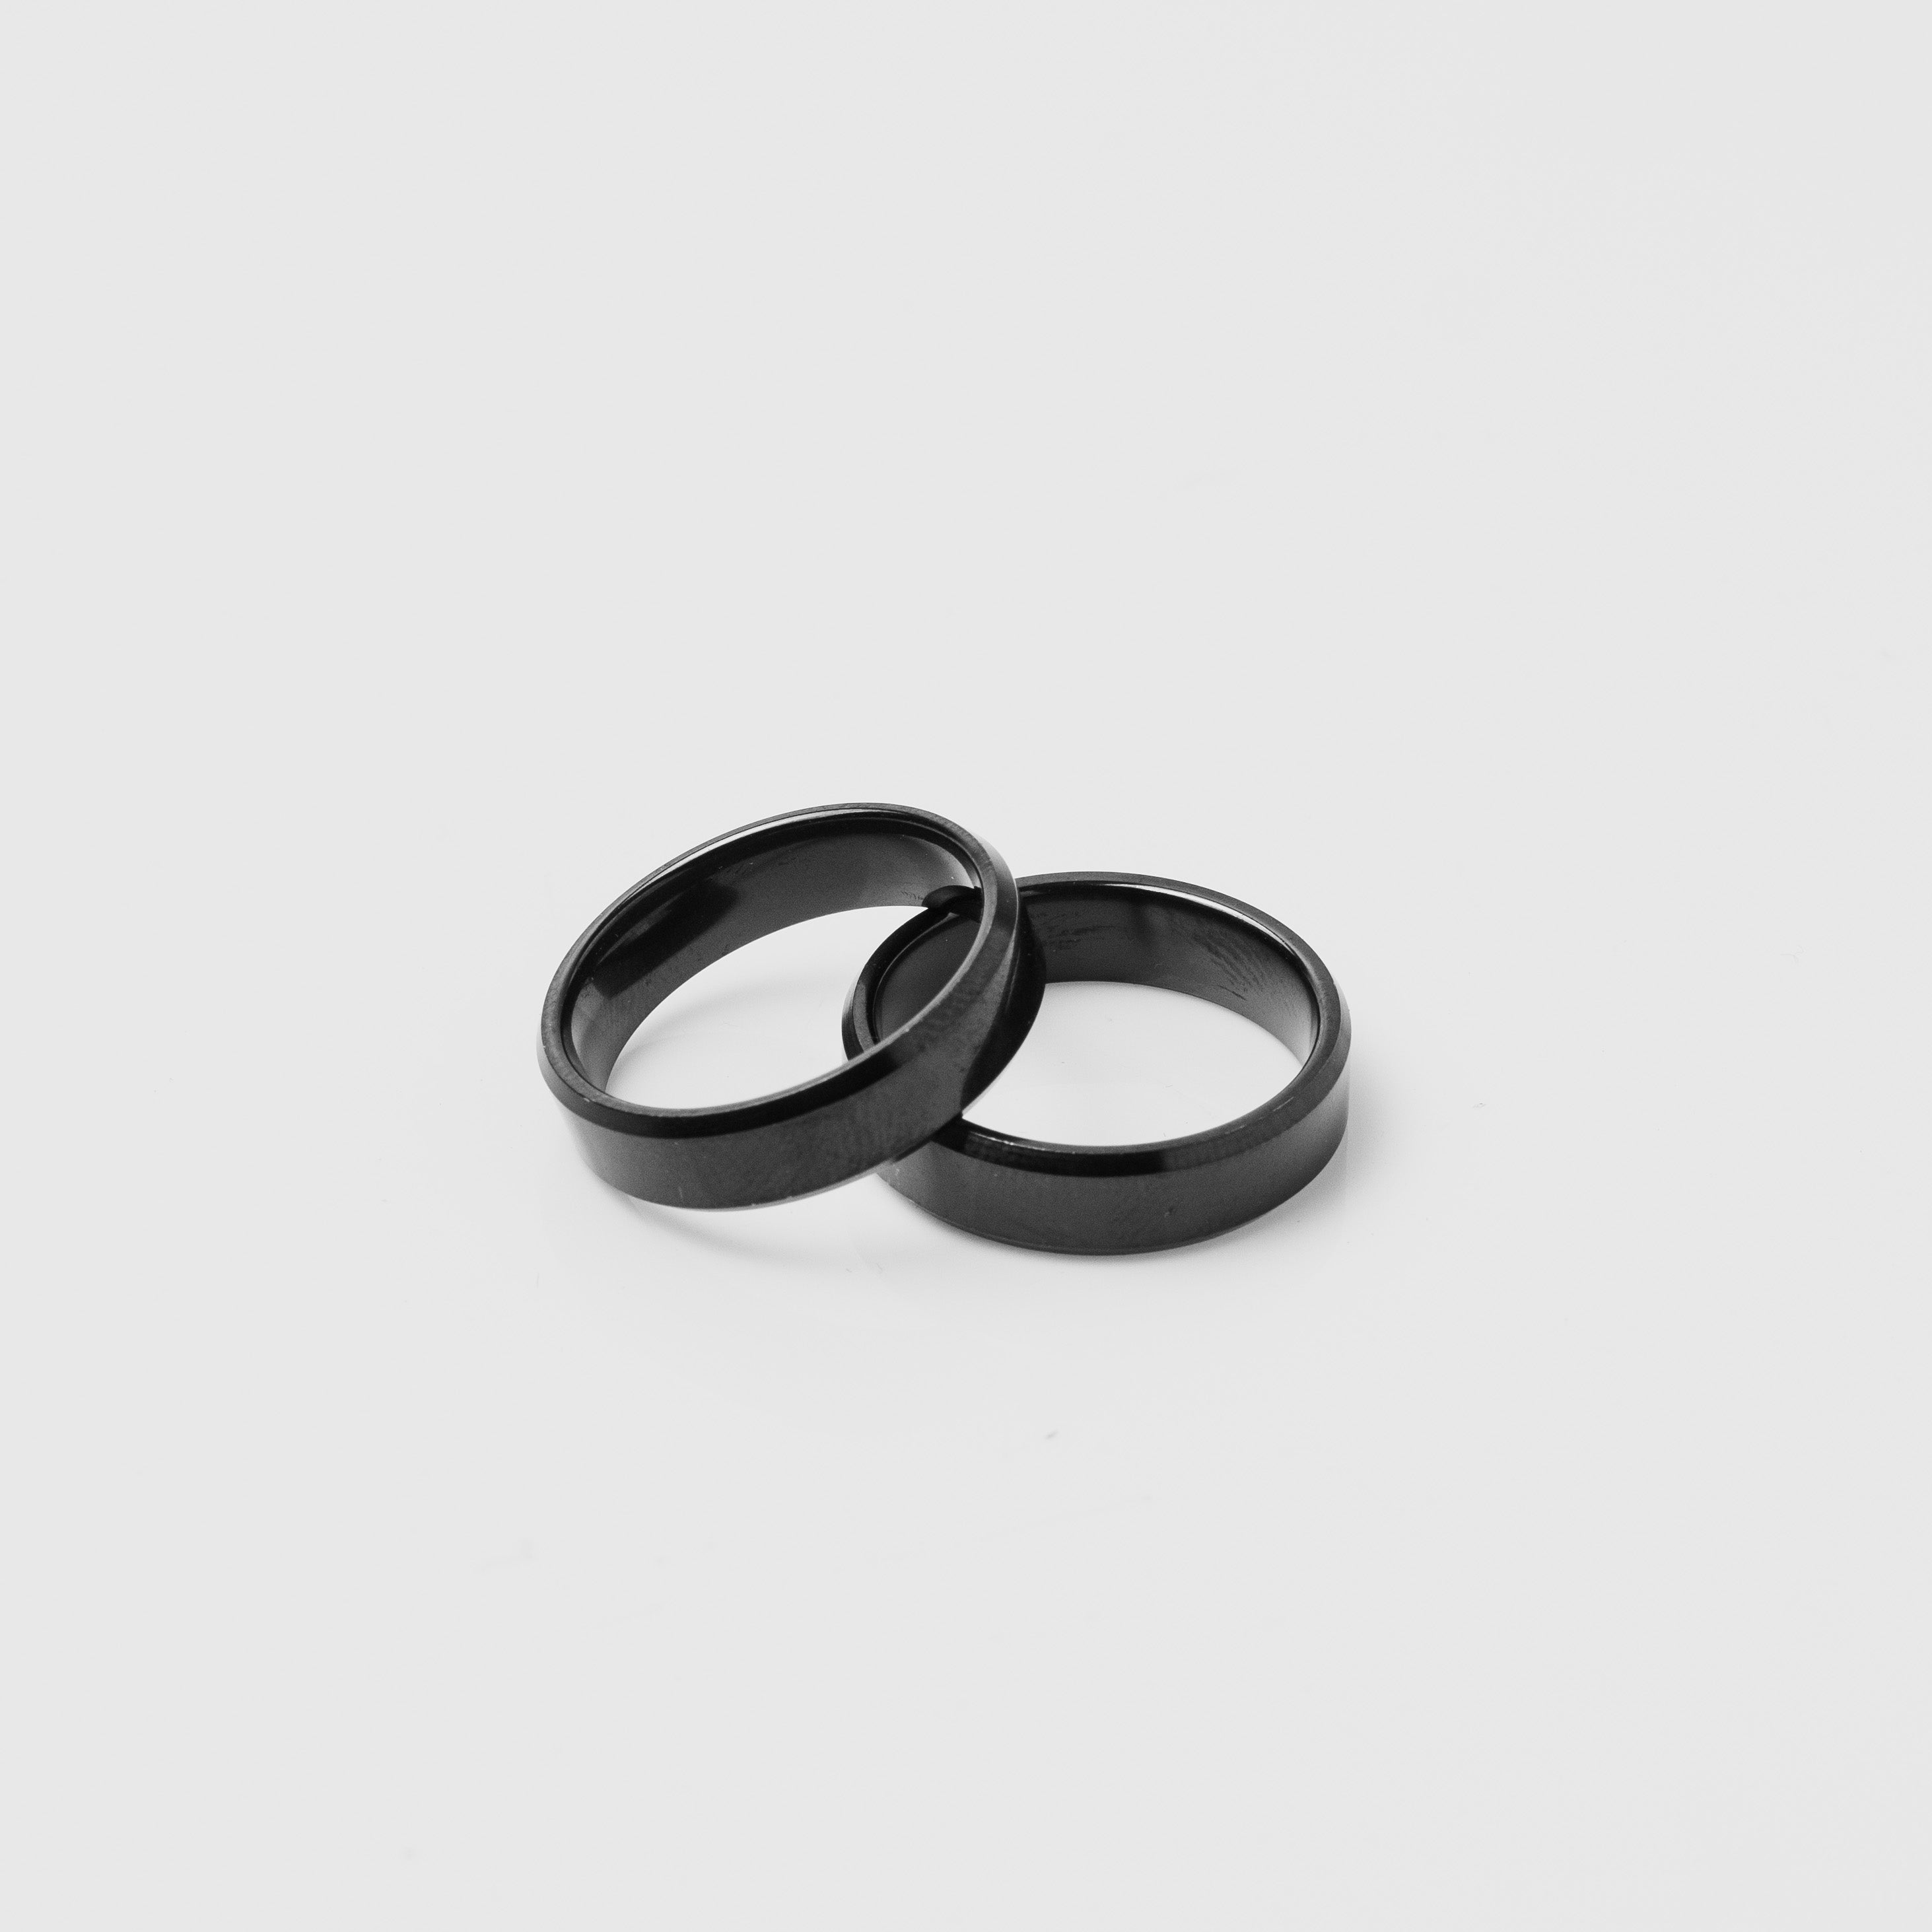 Matte Black Stainless Steel Ring with Satin Edges - 10mm | Stainless steel  rings, Steel ring, Black rings